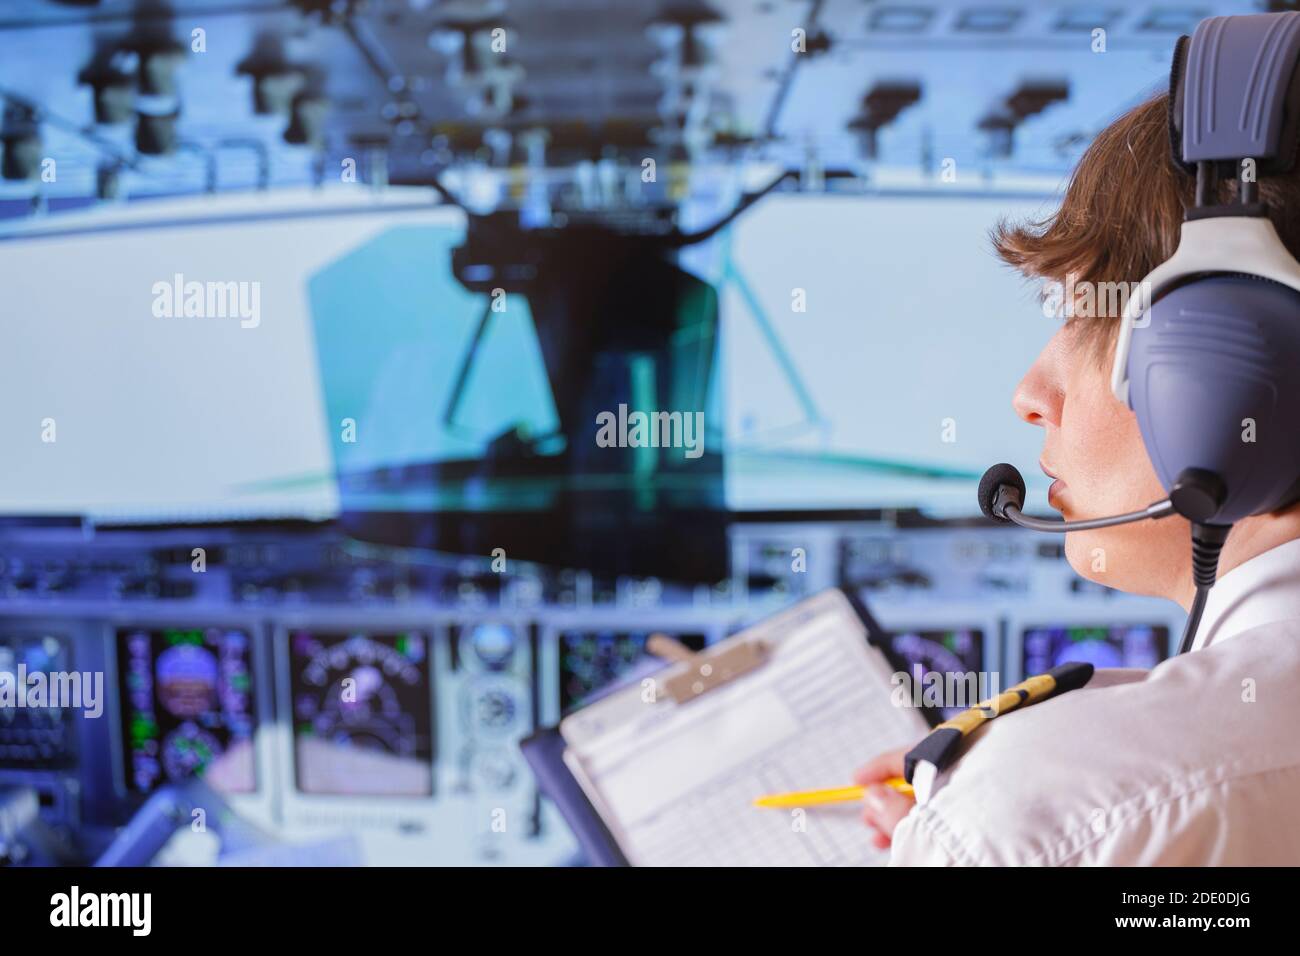 Beautiful woman pilot wearing uniform with epauletes and headset, writting on notepad inside airliner Stock Photo